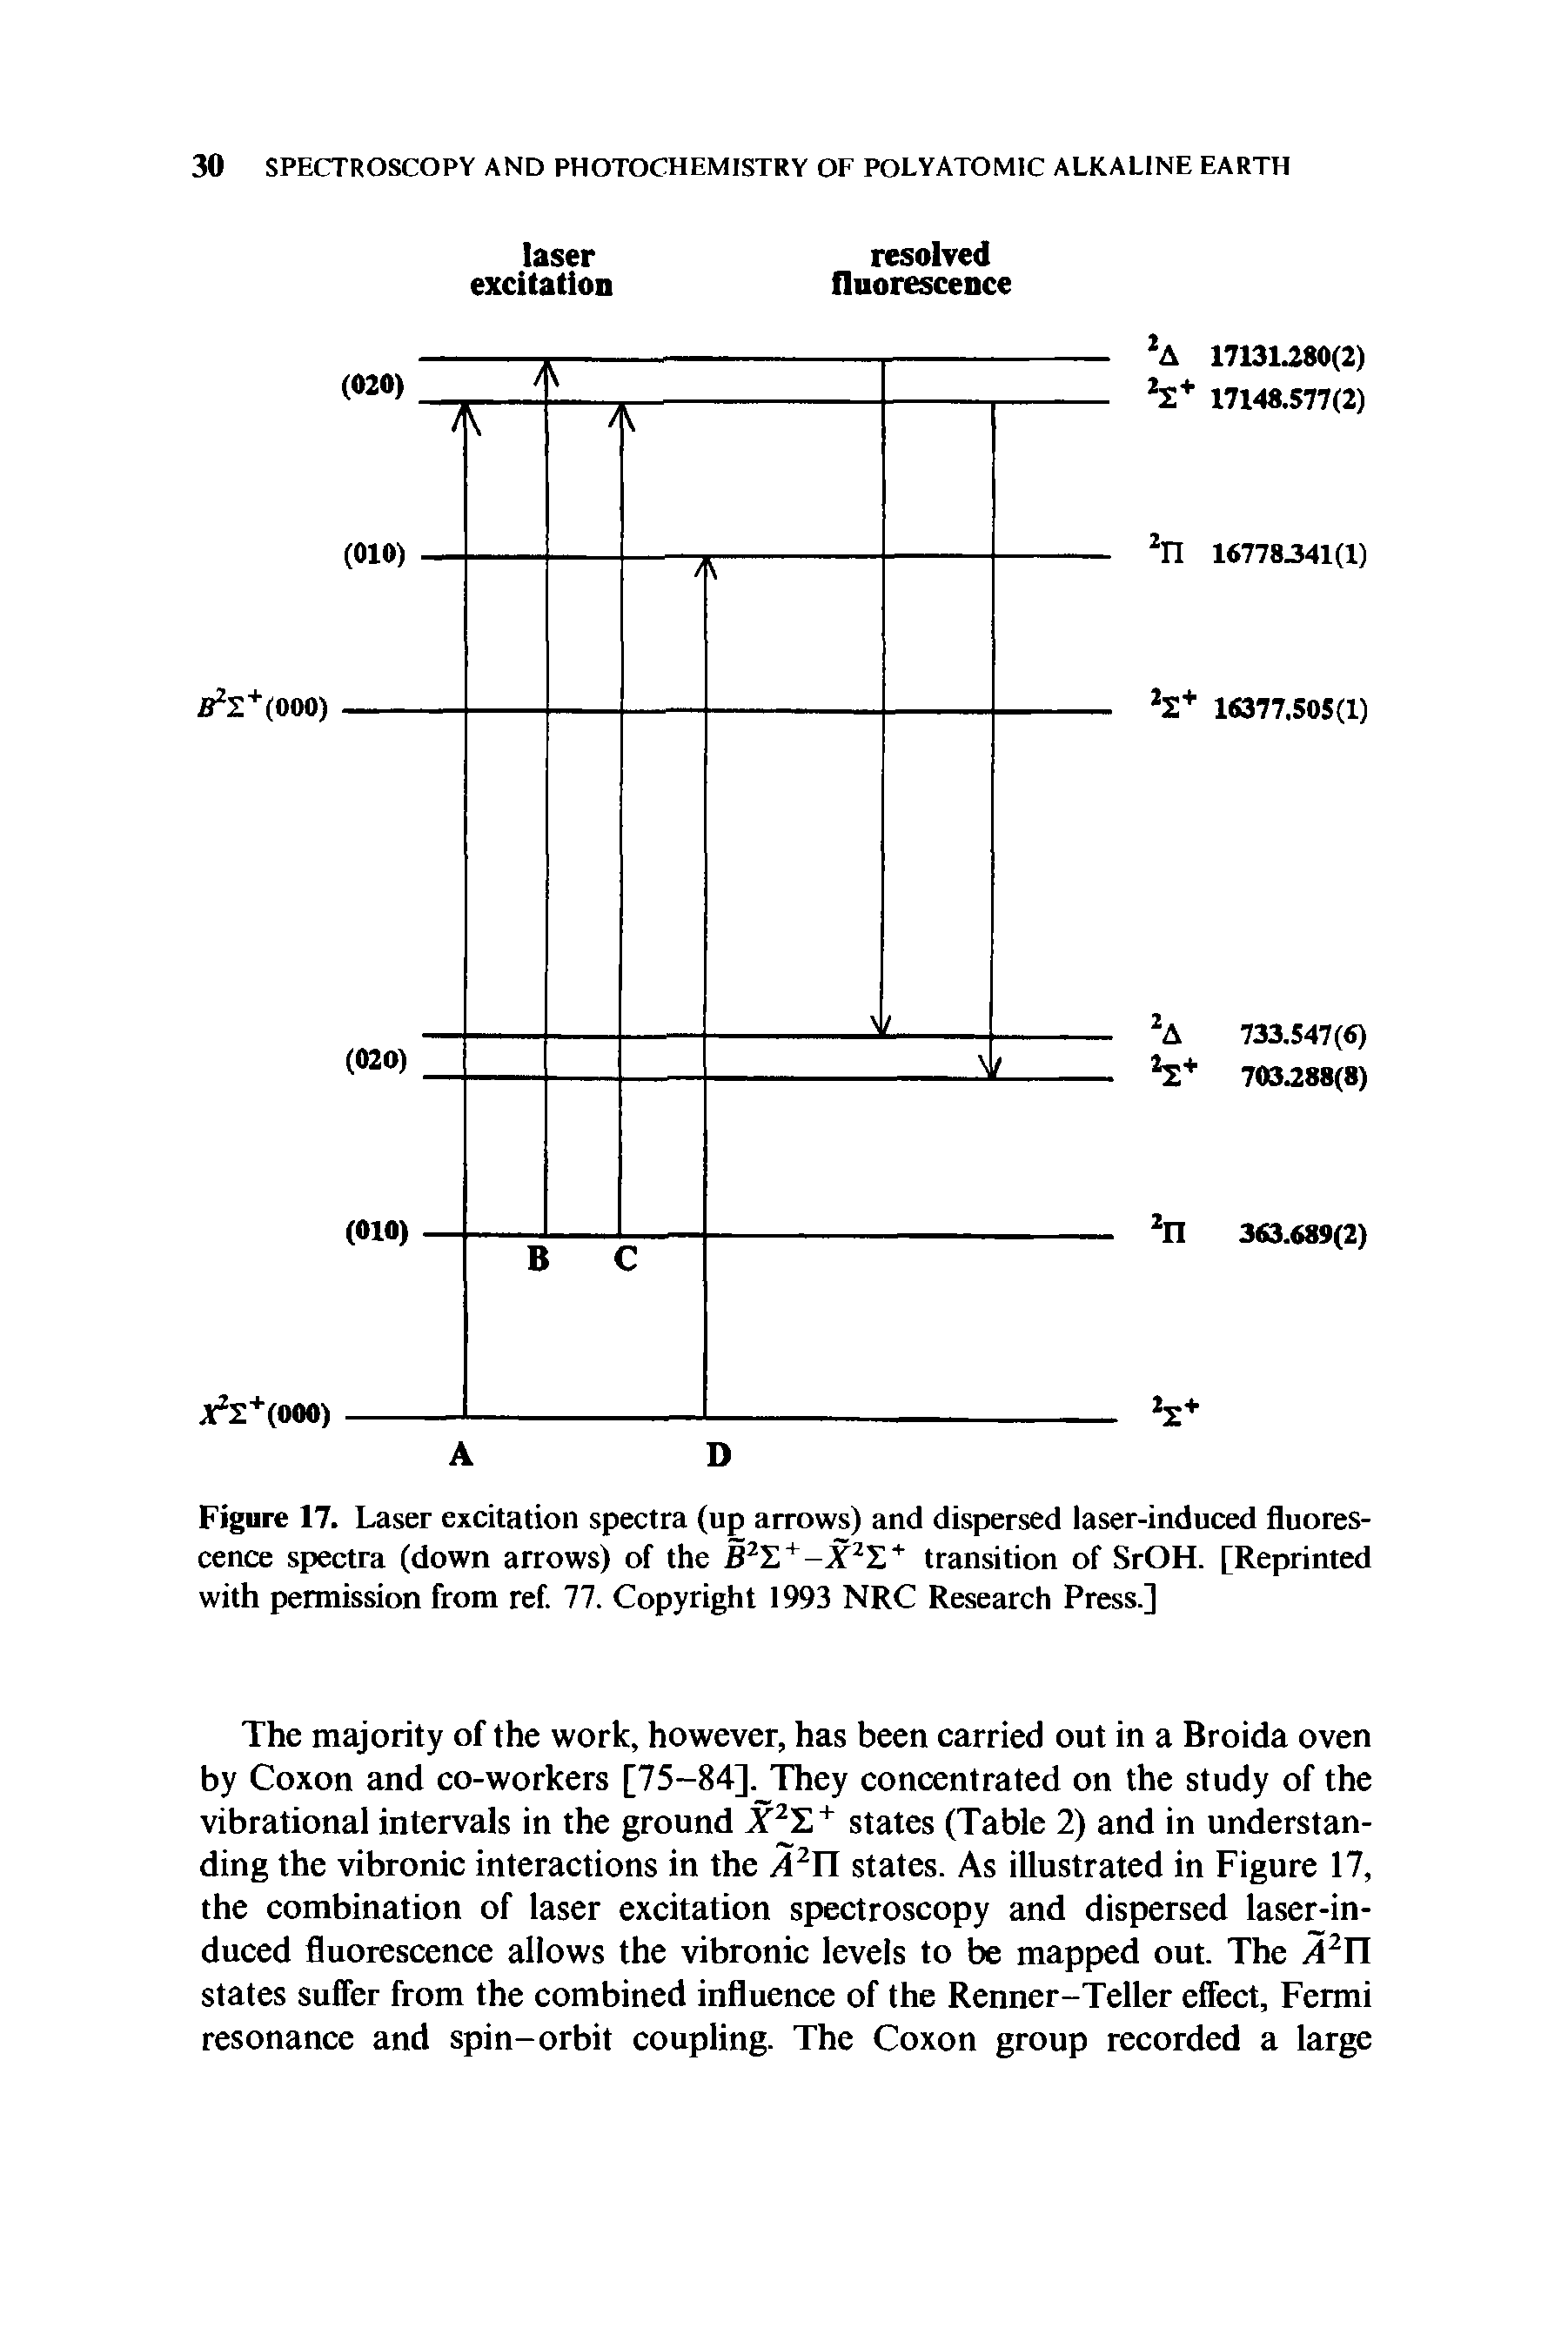 Figure 17. Laser excitation spectra (up arrows) and dispersed laser-induced fluorescence spectra (down arrows) of the B21.+-X2I.+ transition of SrOH. [Reprinted with permission from ref. 77. Copyright 1993 NRC Research Press.]...